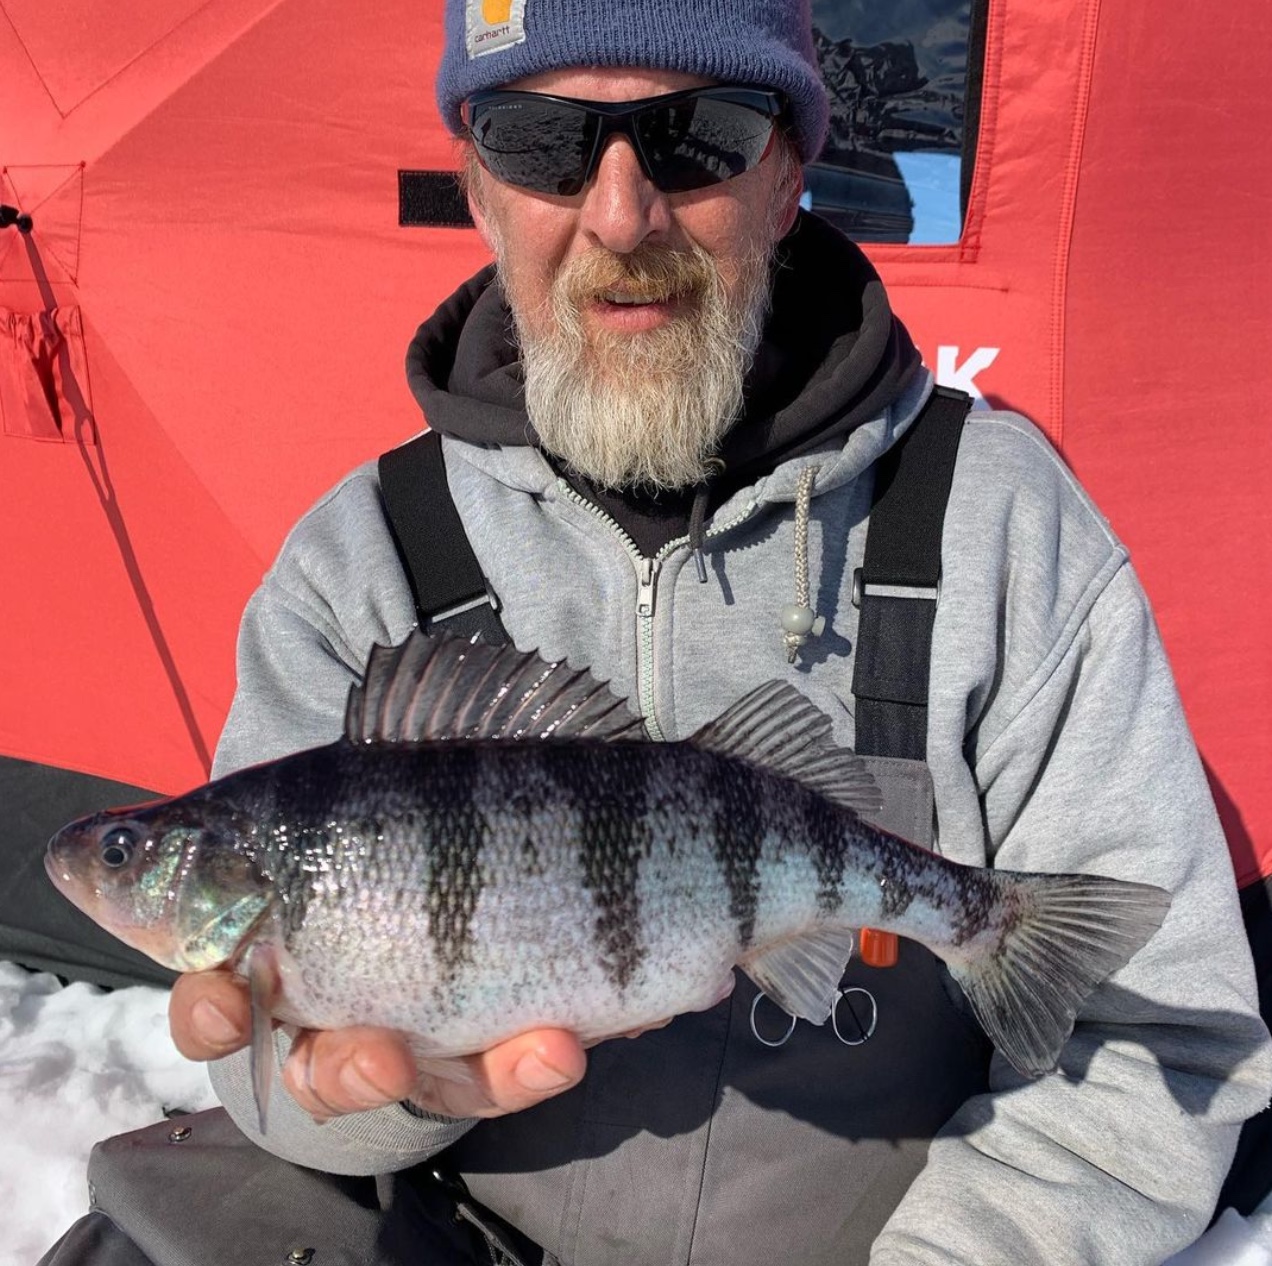 Blue perch caught, Al Lindner goes for carp, Early river walleye